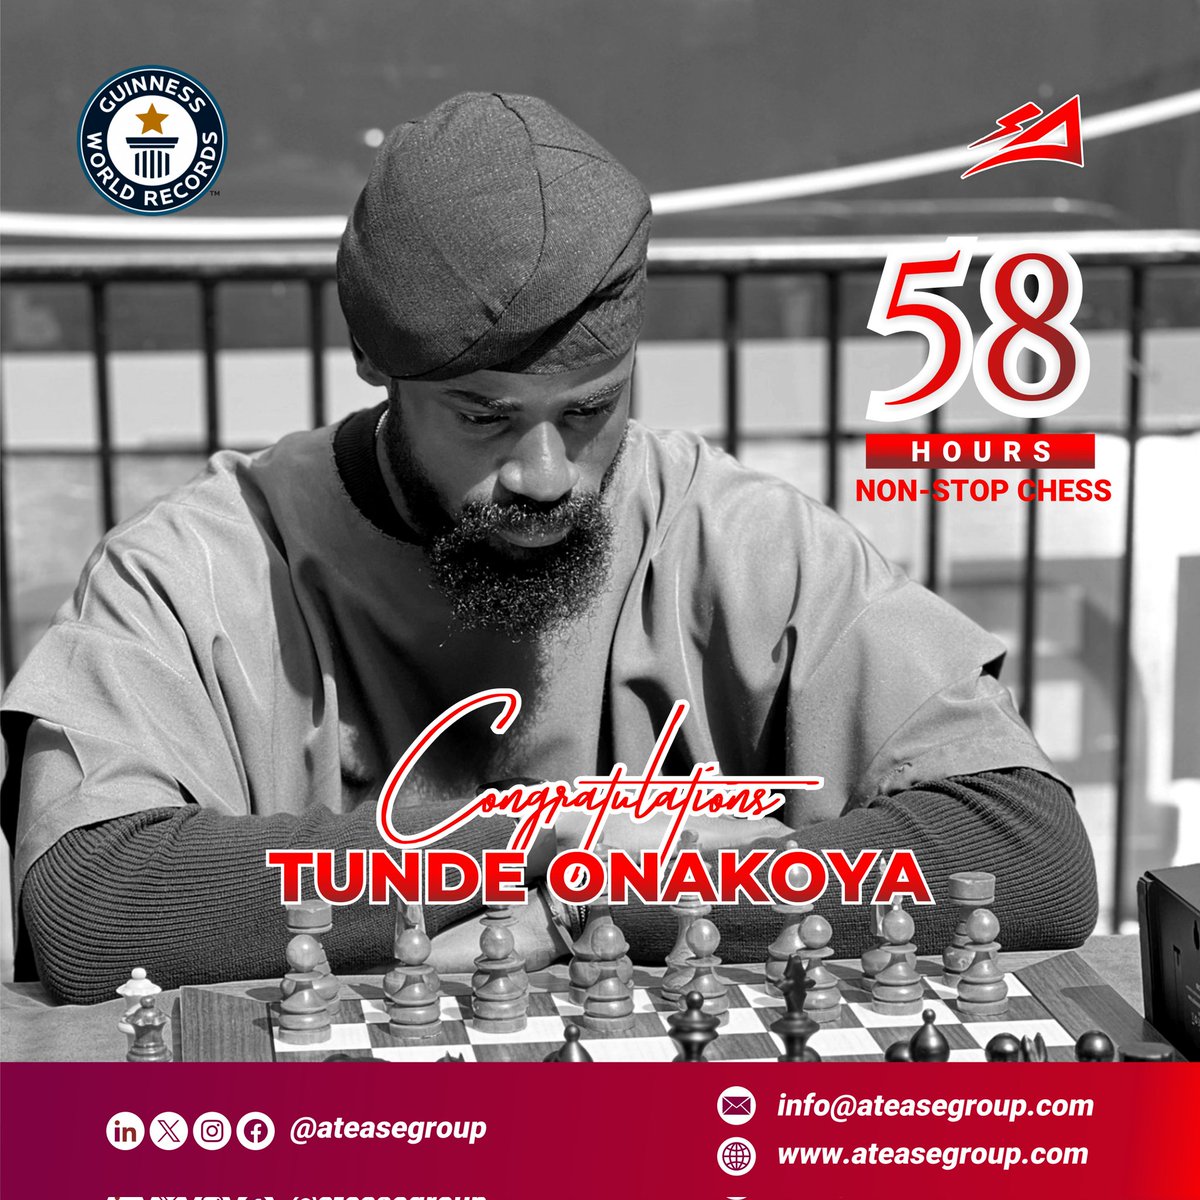 Dear visionary leader @Tunde_OD, we use this medium to congratulate you on your achievement of 58 hrs none stop chess because you're a man worth a nation. Truly, it is possible to do great things from a small place.

#ateasegroup
#TundeOnakoya